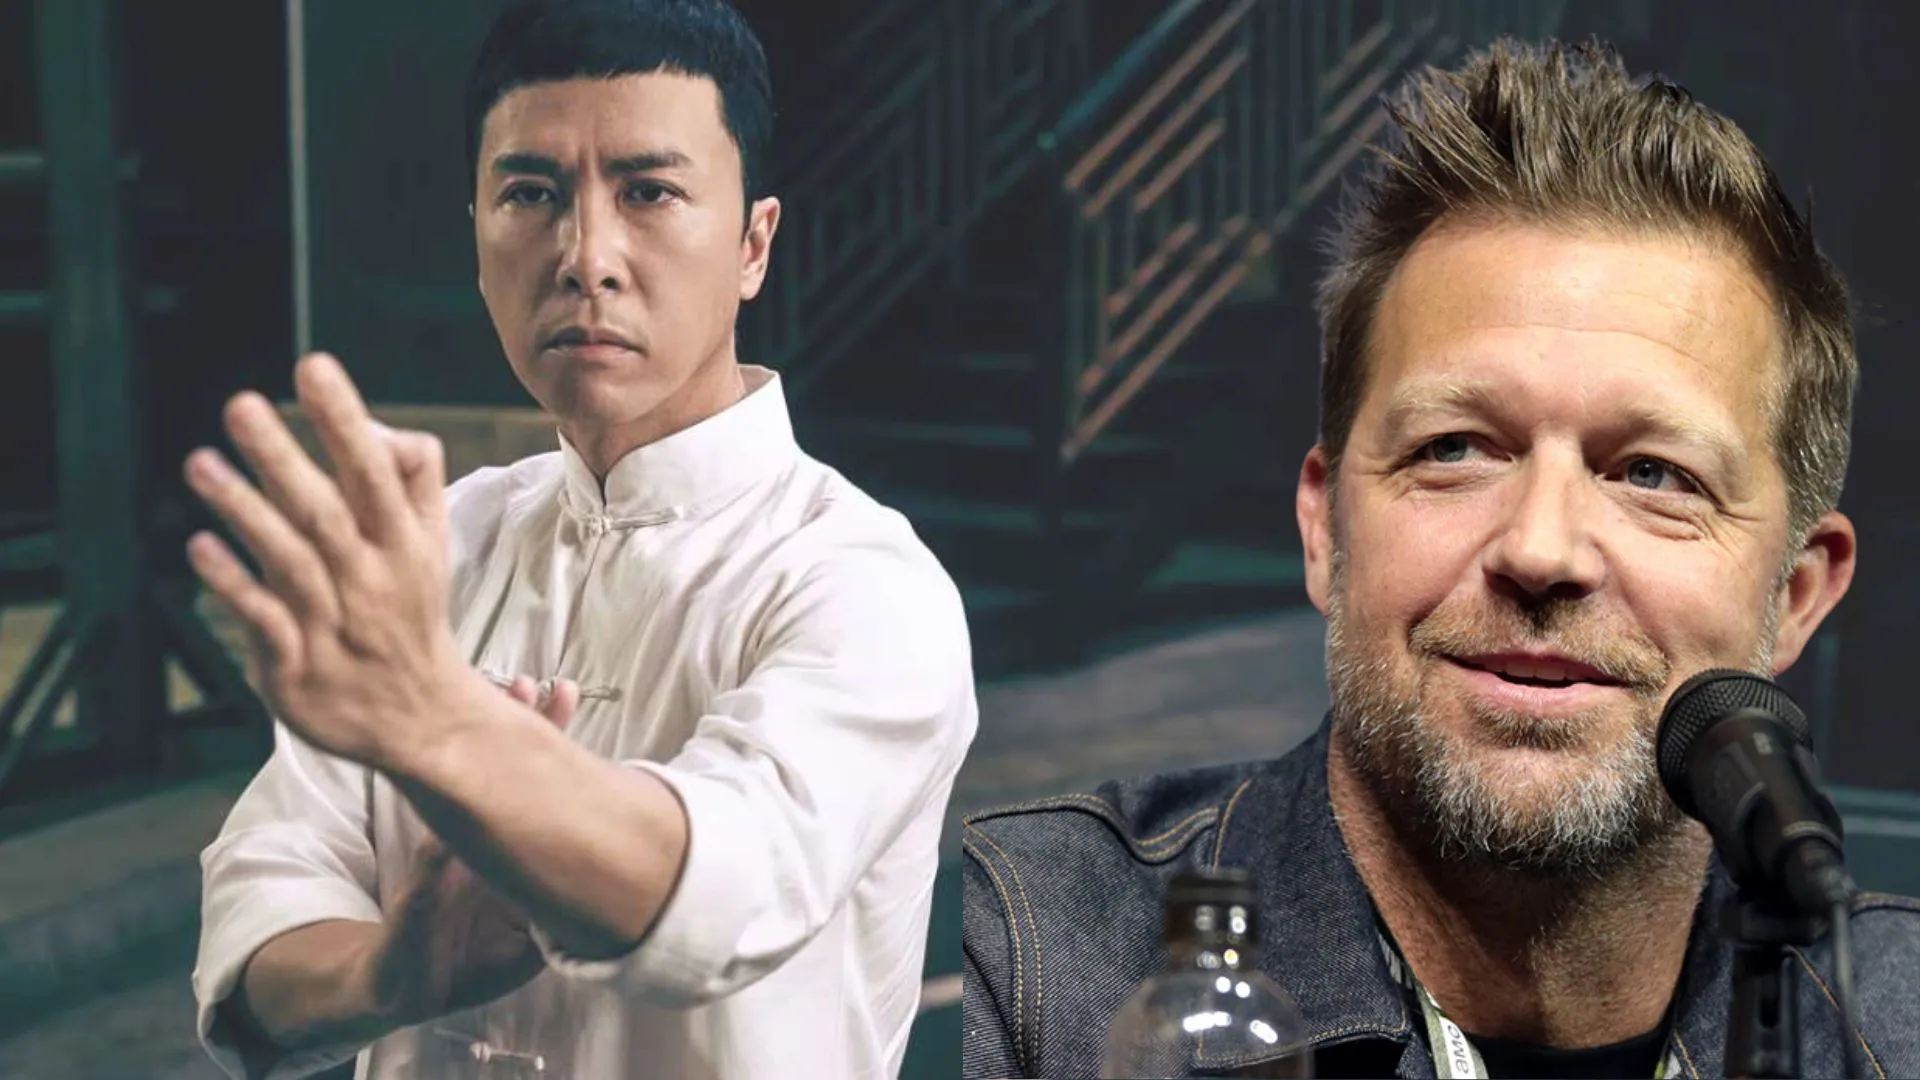 David Leitch Talks Kung Fu with Donnie Yen, Hints at IMAX Possibility